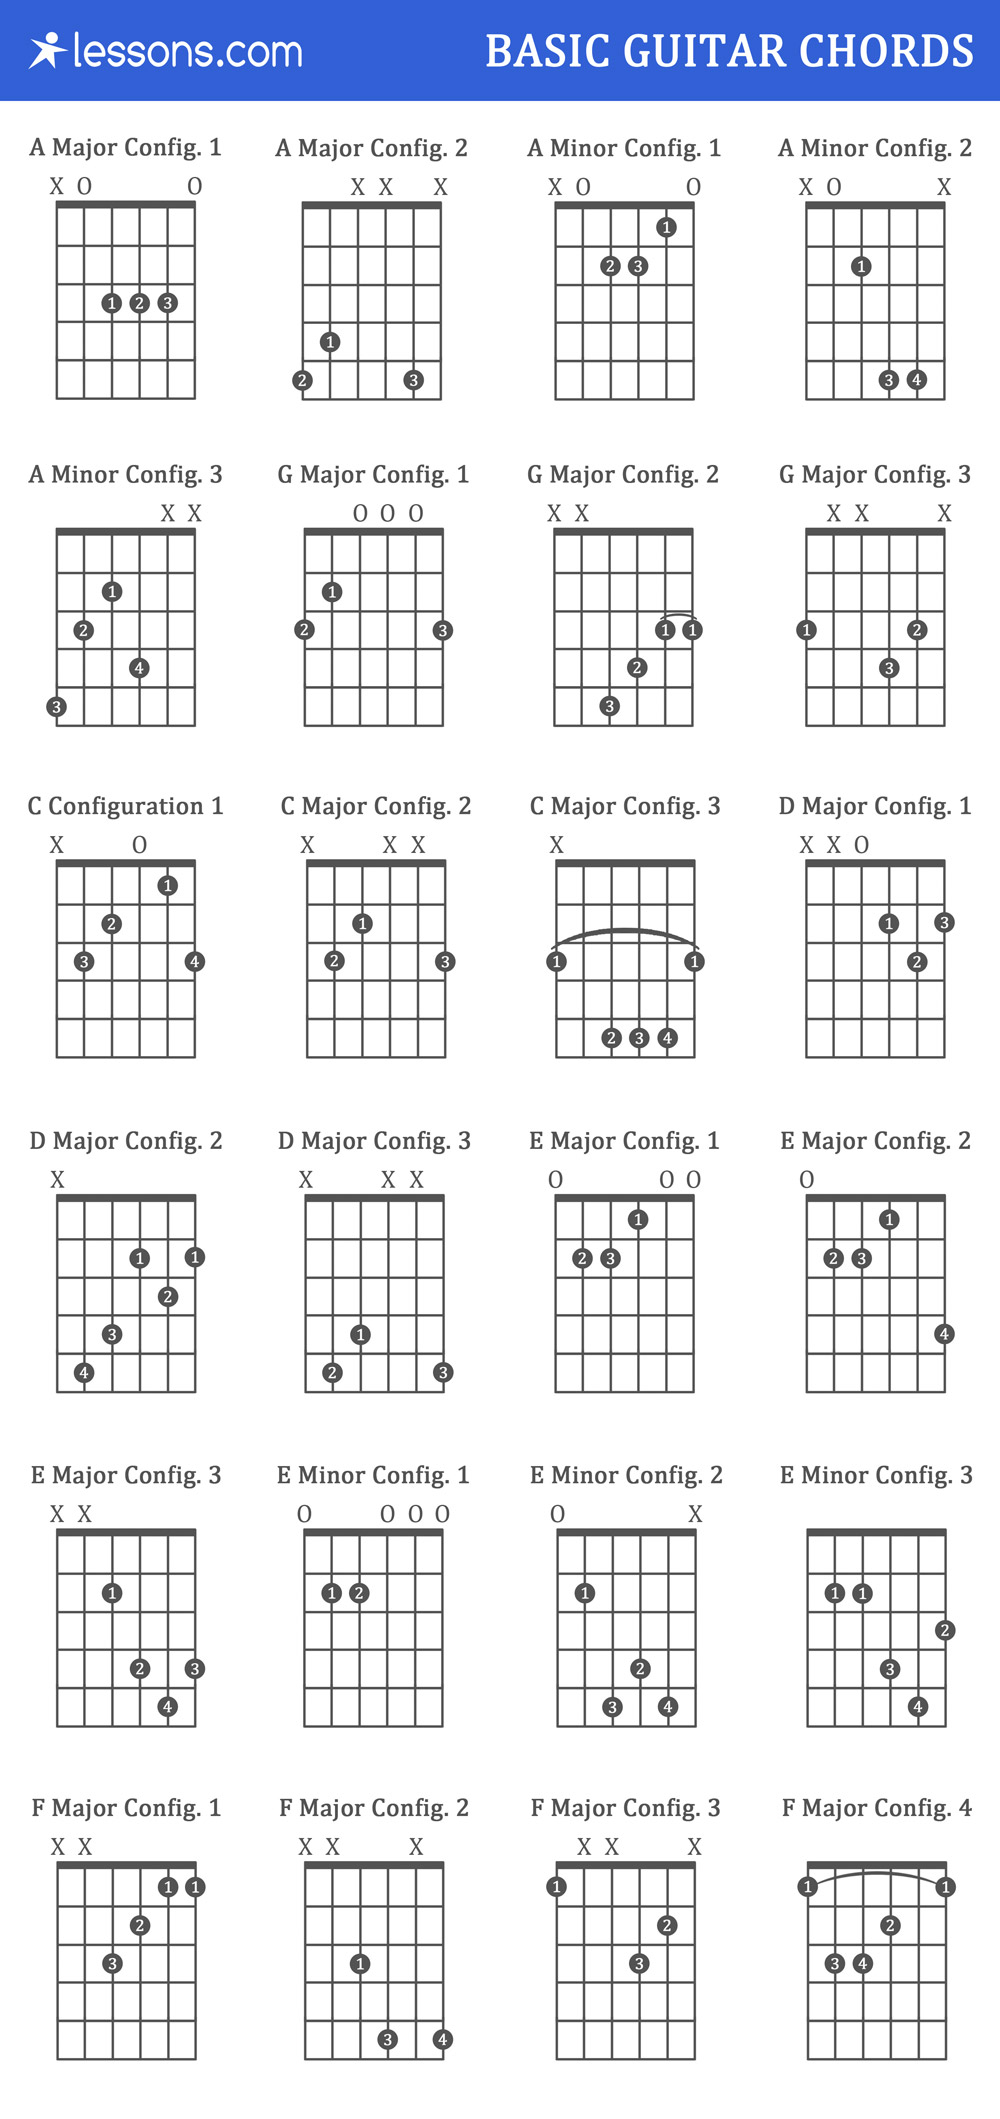 Sweet Home Alabama Chords The 8 Basic Guitar Chords For Beginners With Charts Examples